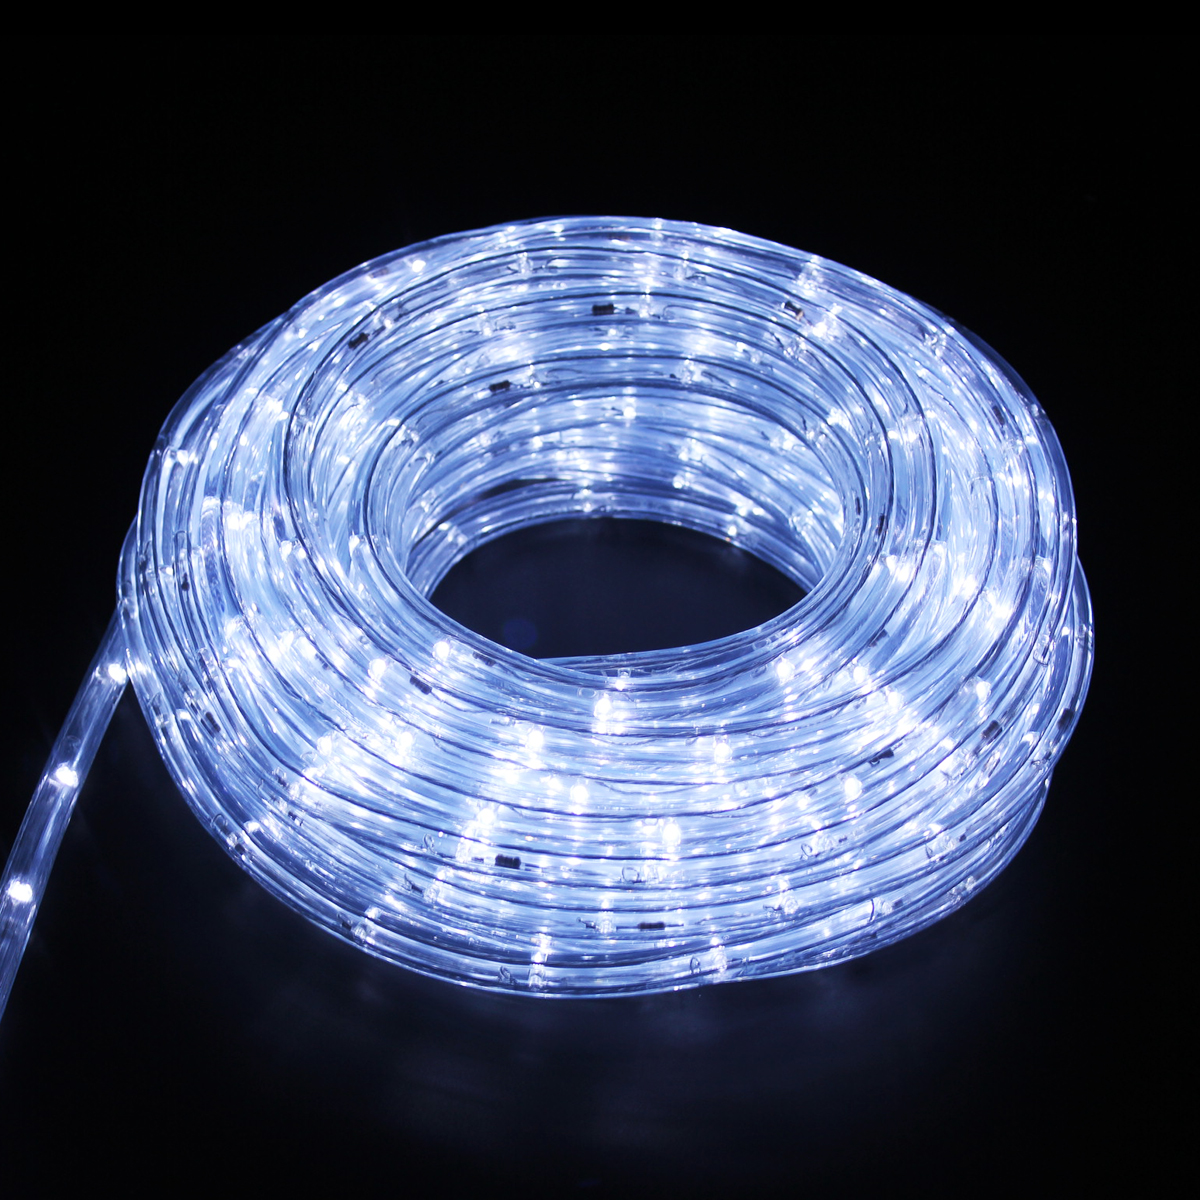 30 Ft LED Rope Fairy Landscape Lights with Remote for Indoor/Outdoor Halloween Christmas Wedding Garden Patio Pool Decor - White - image 1 of 8